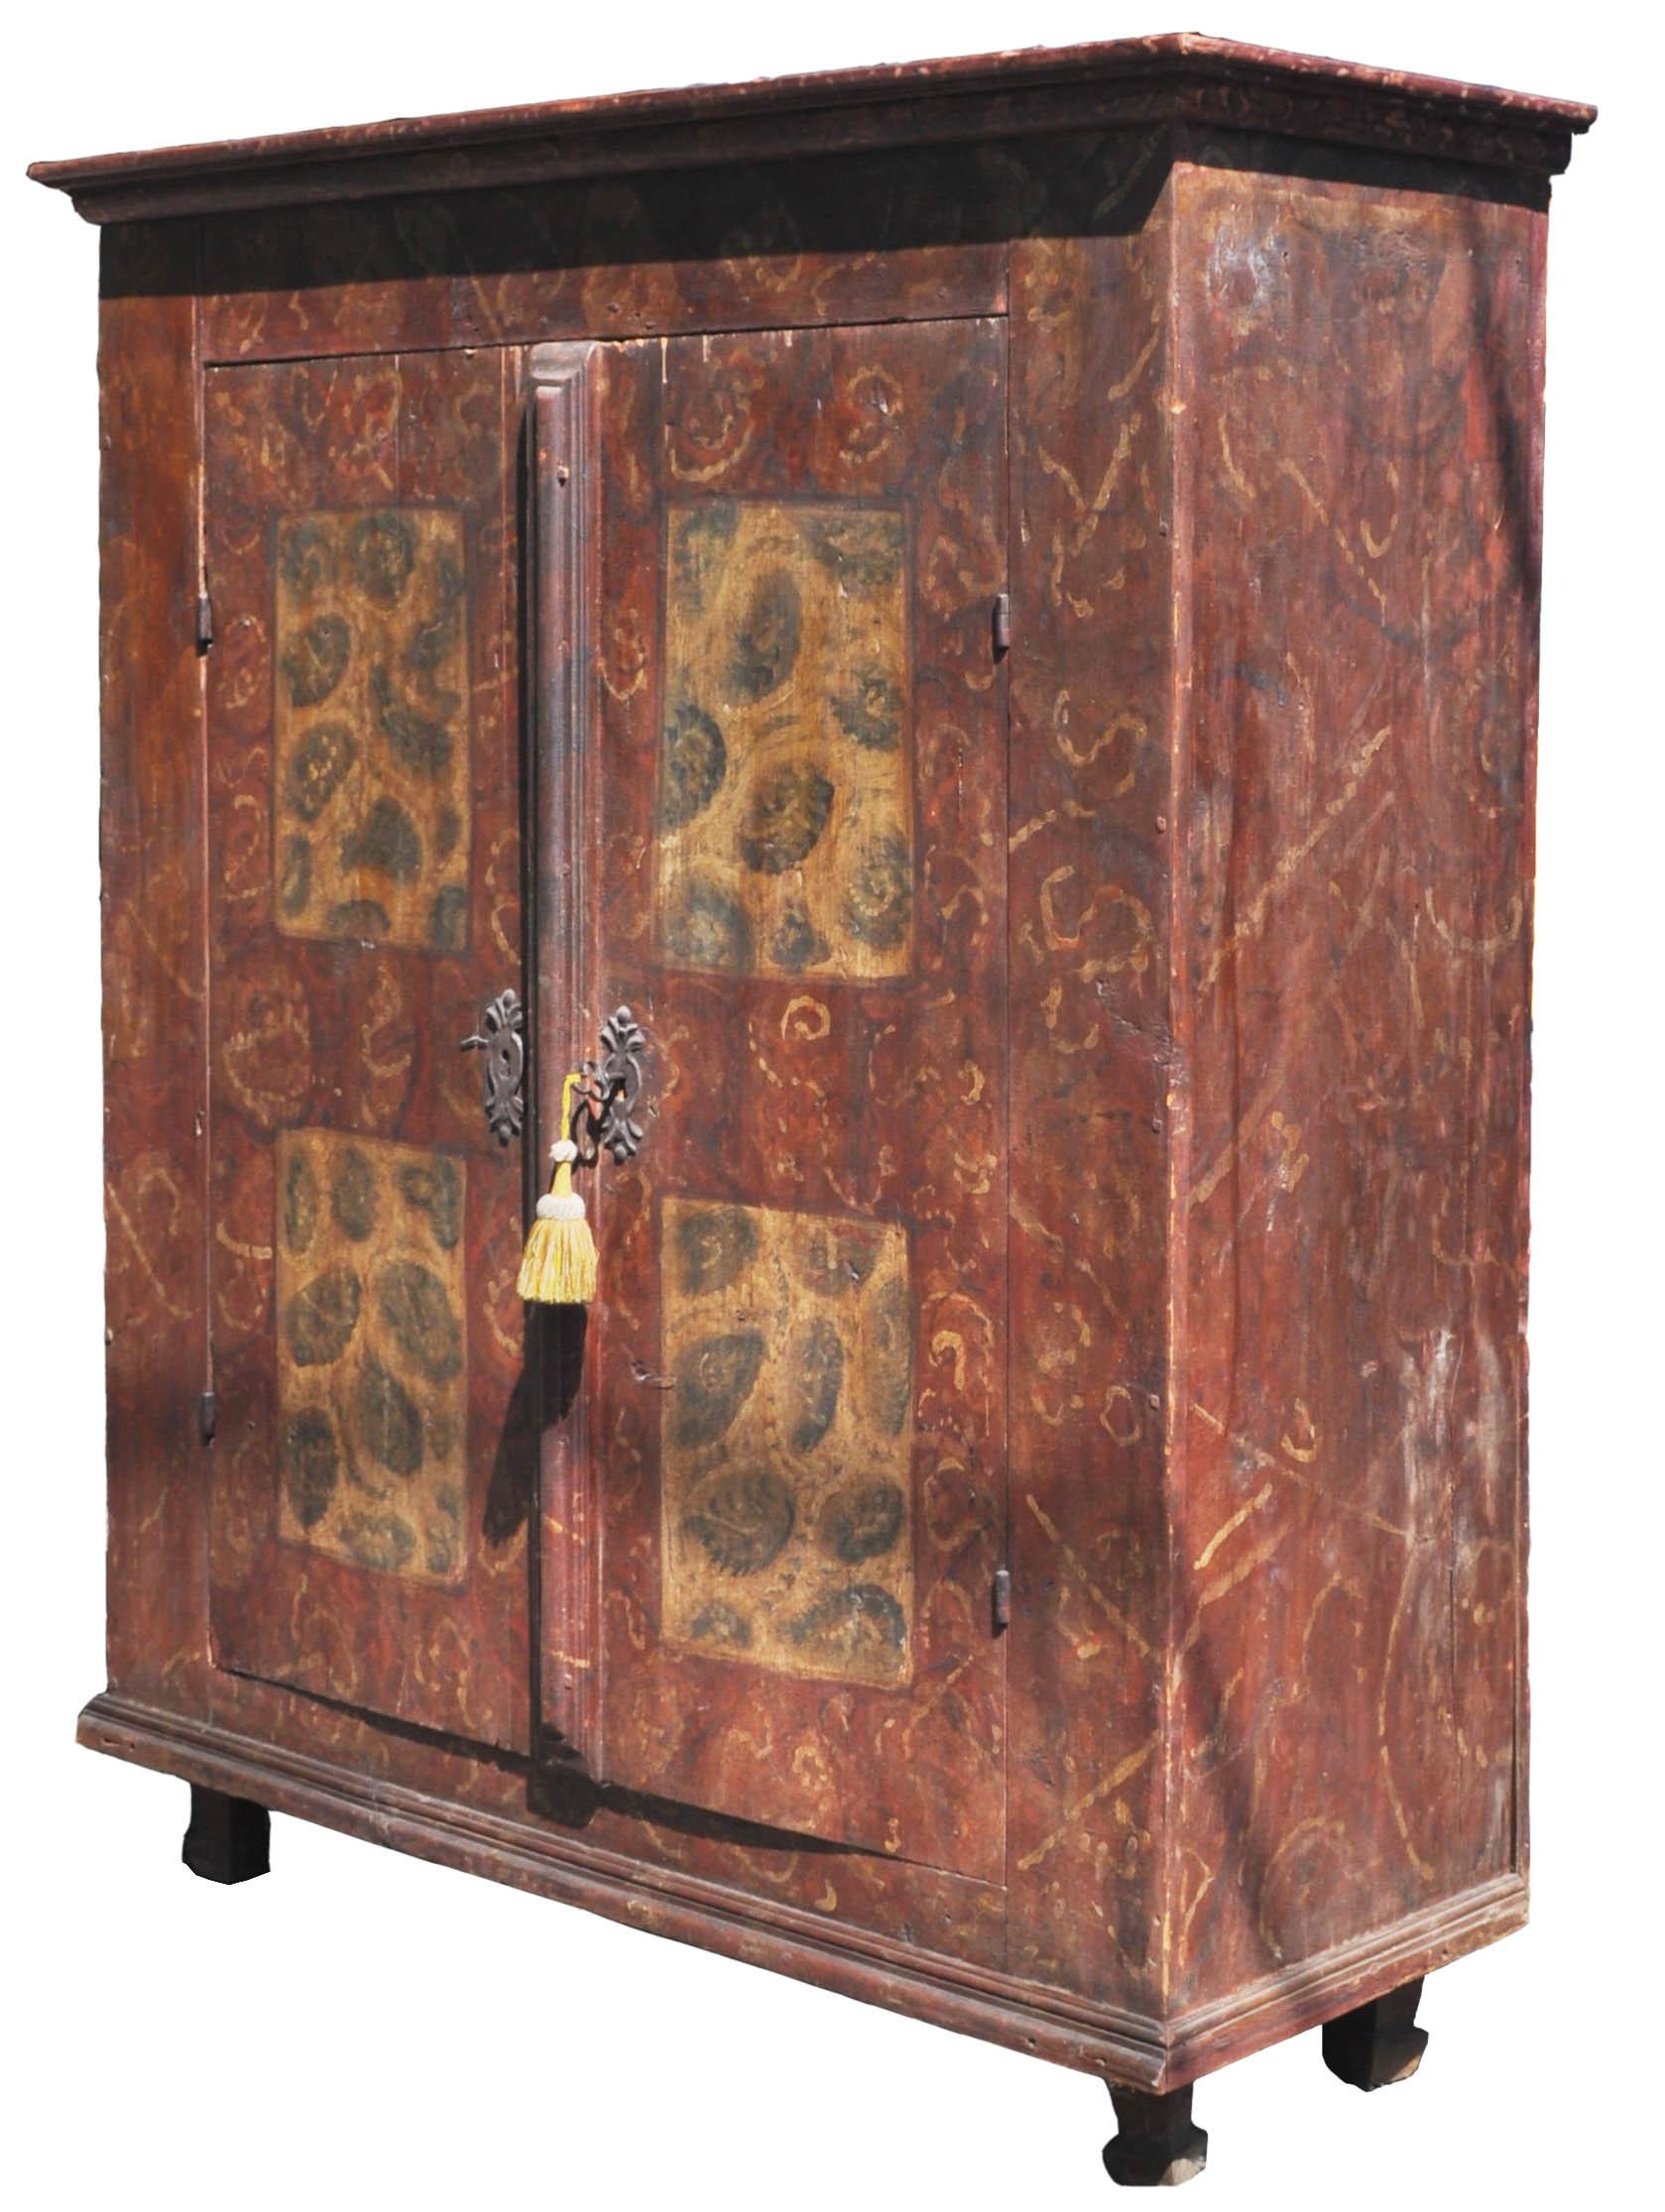 Antique German hand painted cabinet/ Armoire/ Kas, circa 1780. The cabinet is made of pine and retains the original 'sponged' paint decoration. To the top is a stepped cornice with two doors below, each door with a pair of painted panels, having the